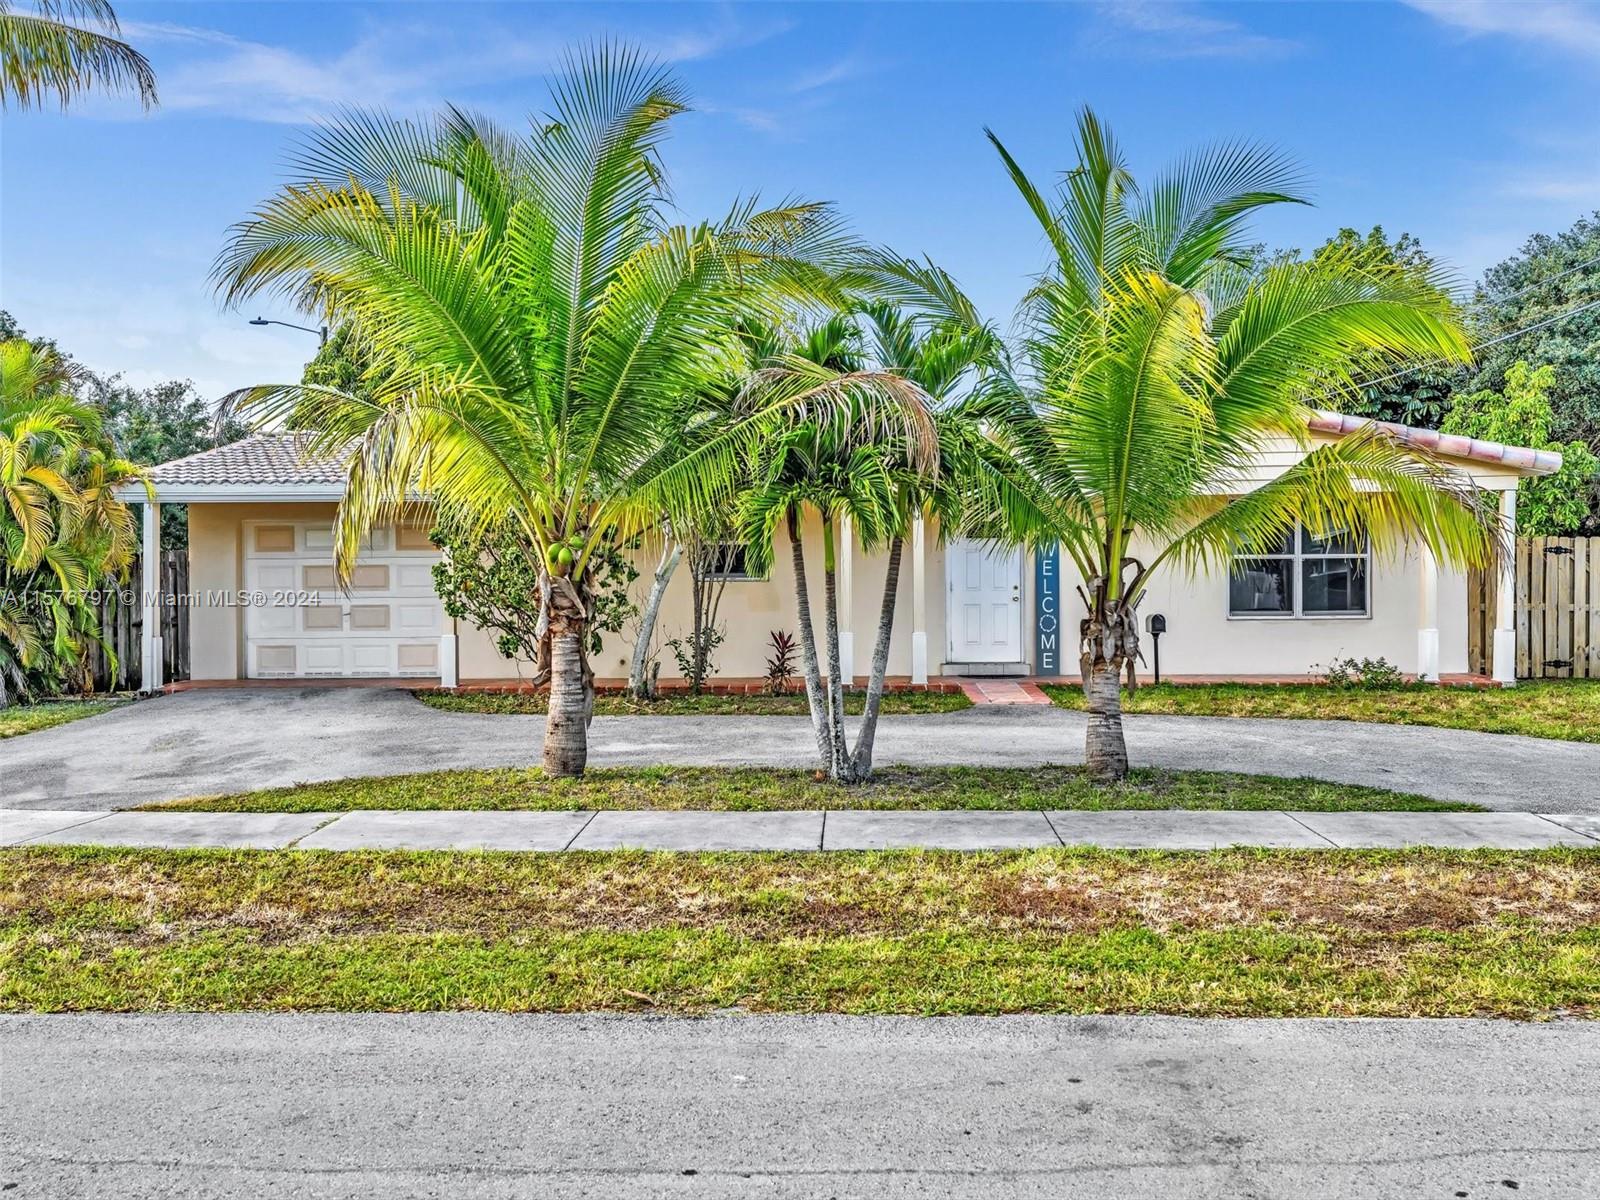 6200 Nw 13th St St, Sunrise, Miami-Dade County, Florida - 4 Bedrooms  
2 Bathrooms - 